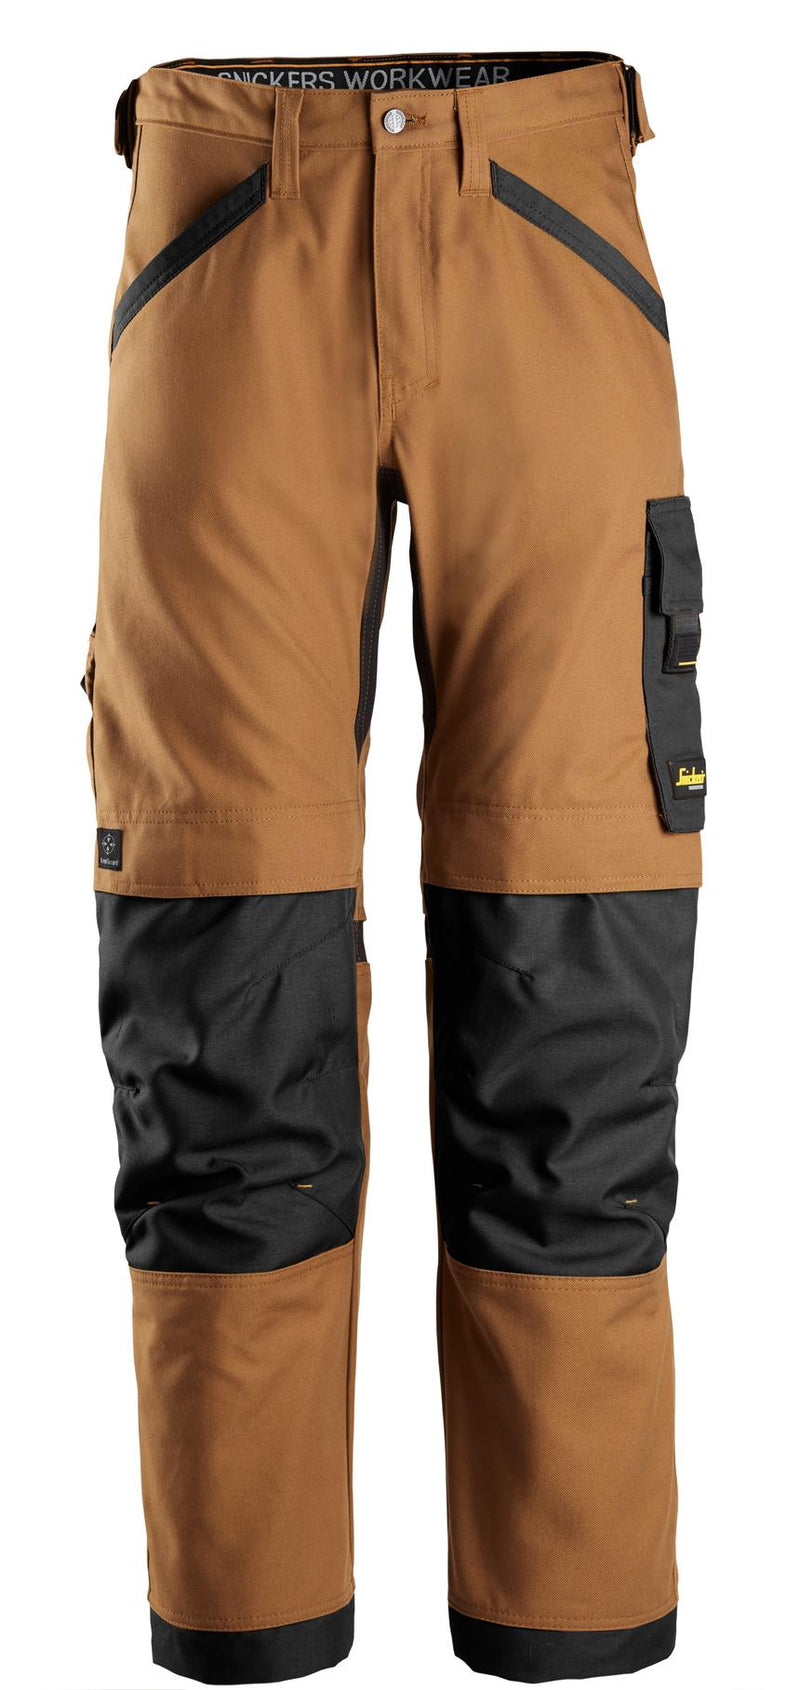 Snickers 6324 AllroundWork Stretch Canvas Work Trousers - Brown/Black